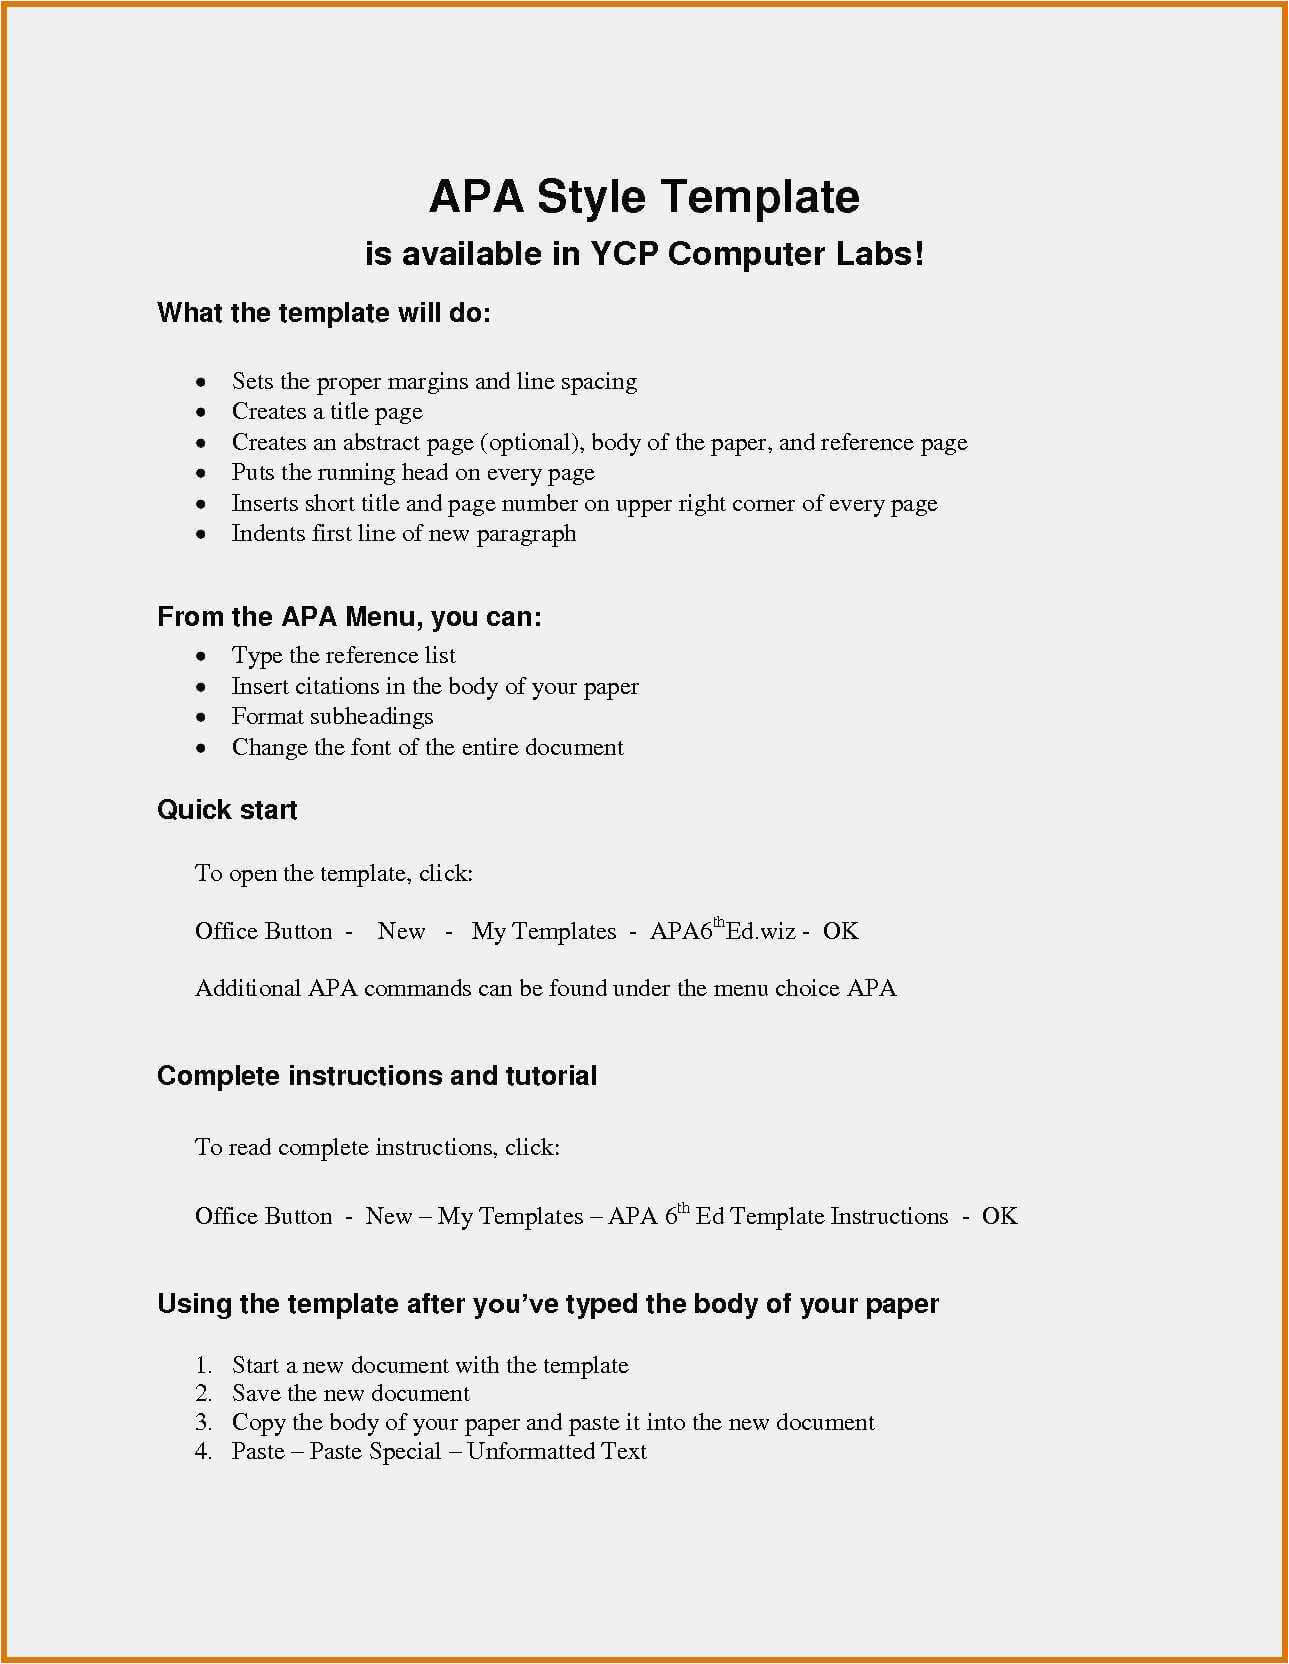 024 Apa Reference Page Template Word Style Paper Format For Apa Template For Word 2010